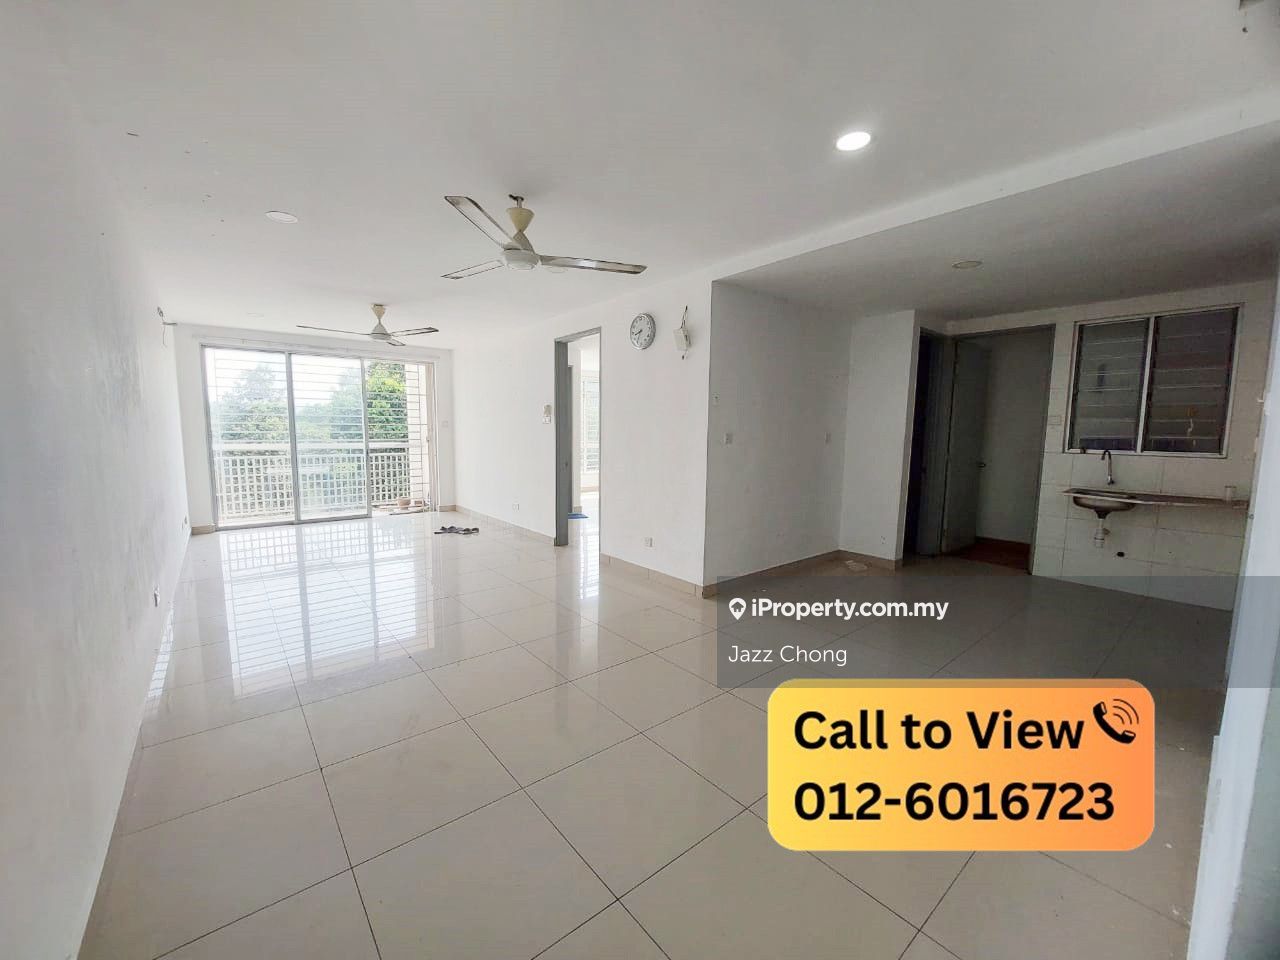 Vacant Now, Viewing Available, 4room with balcony, Near Hukm